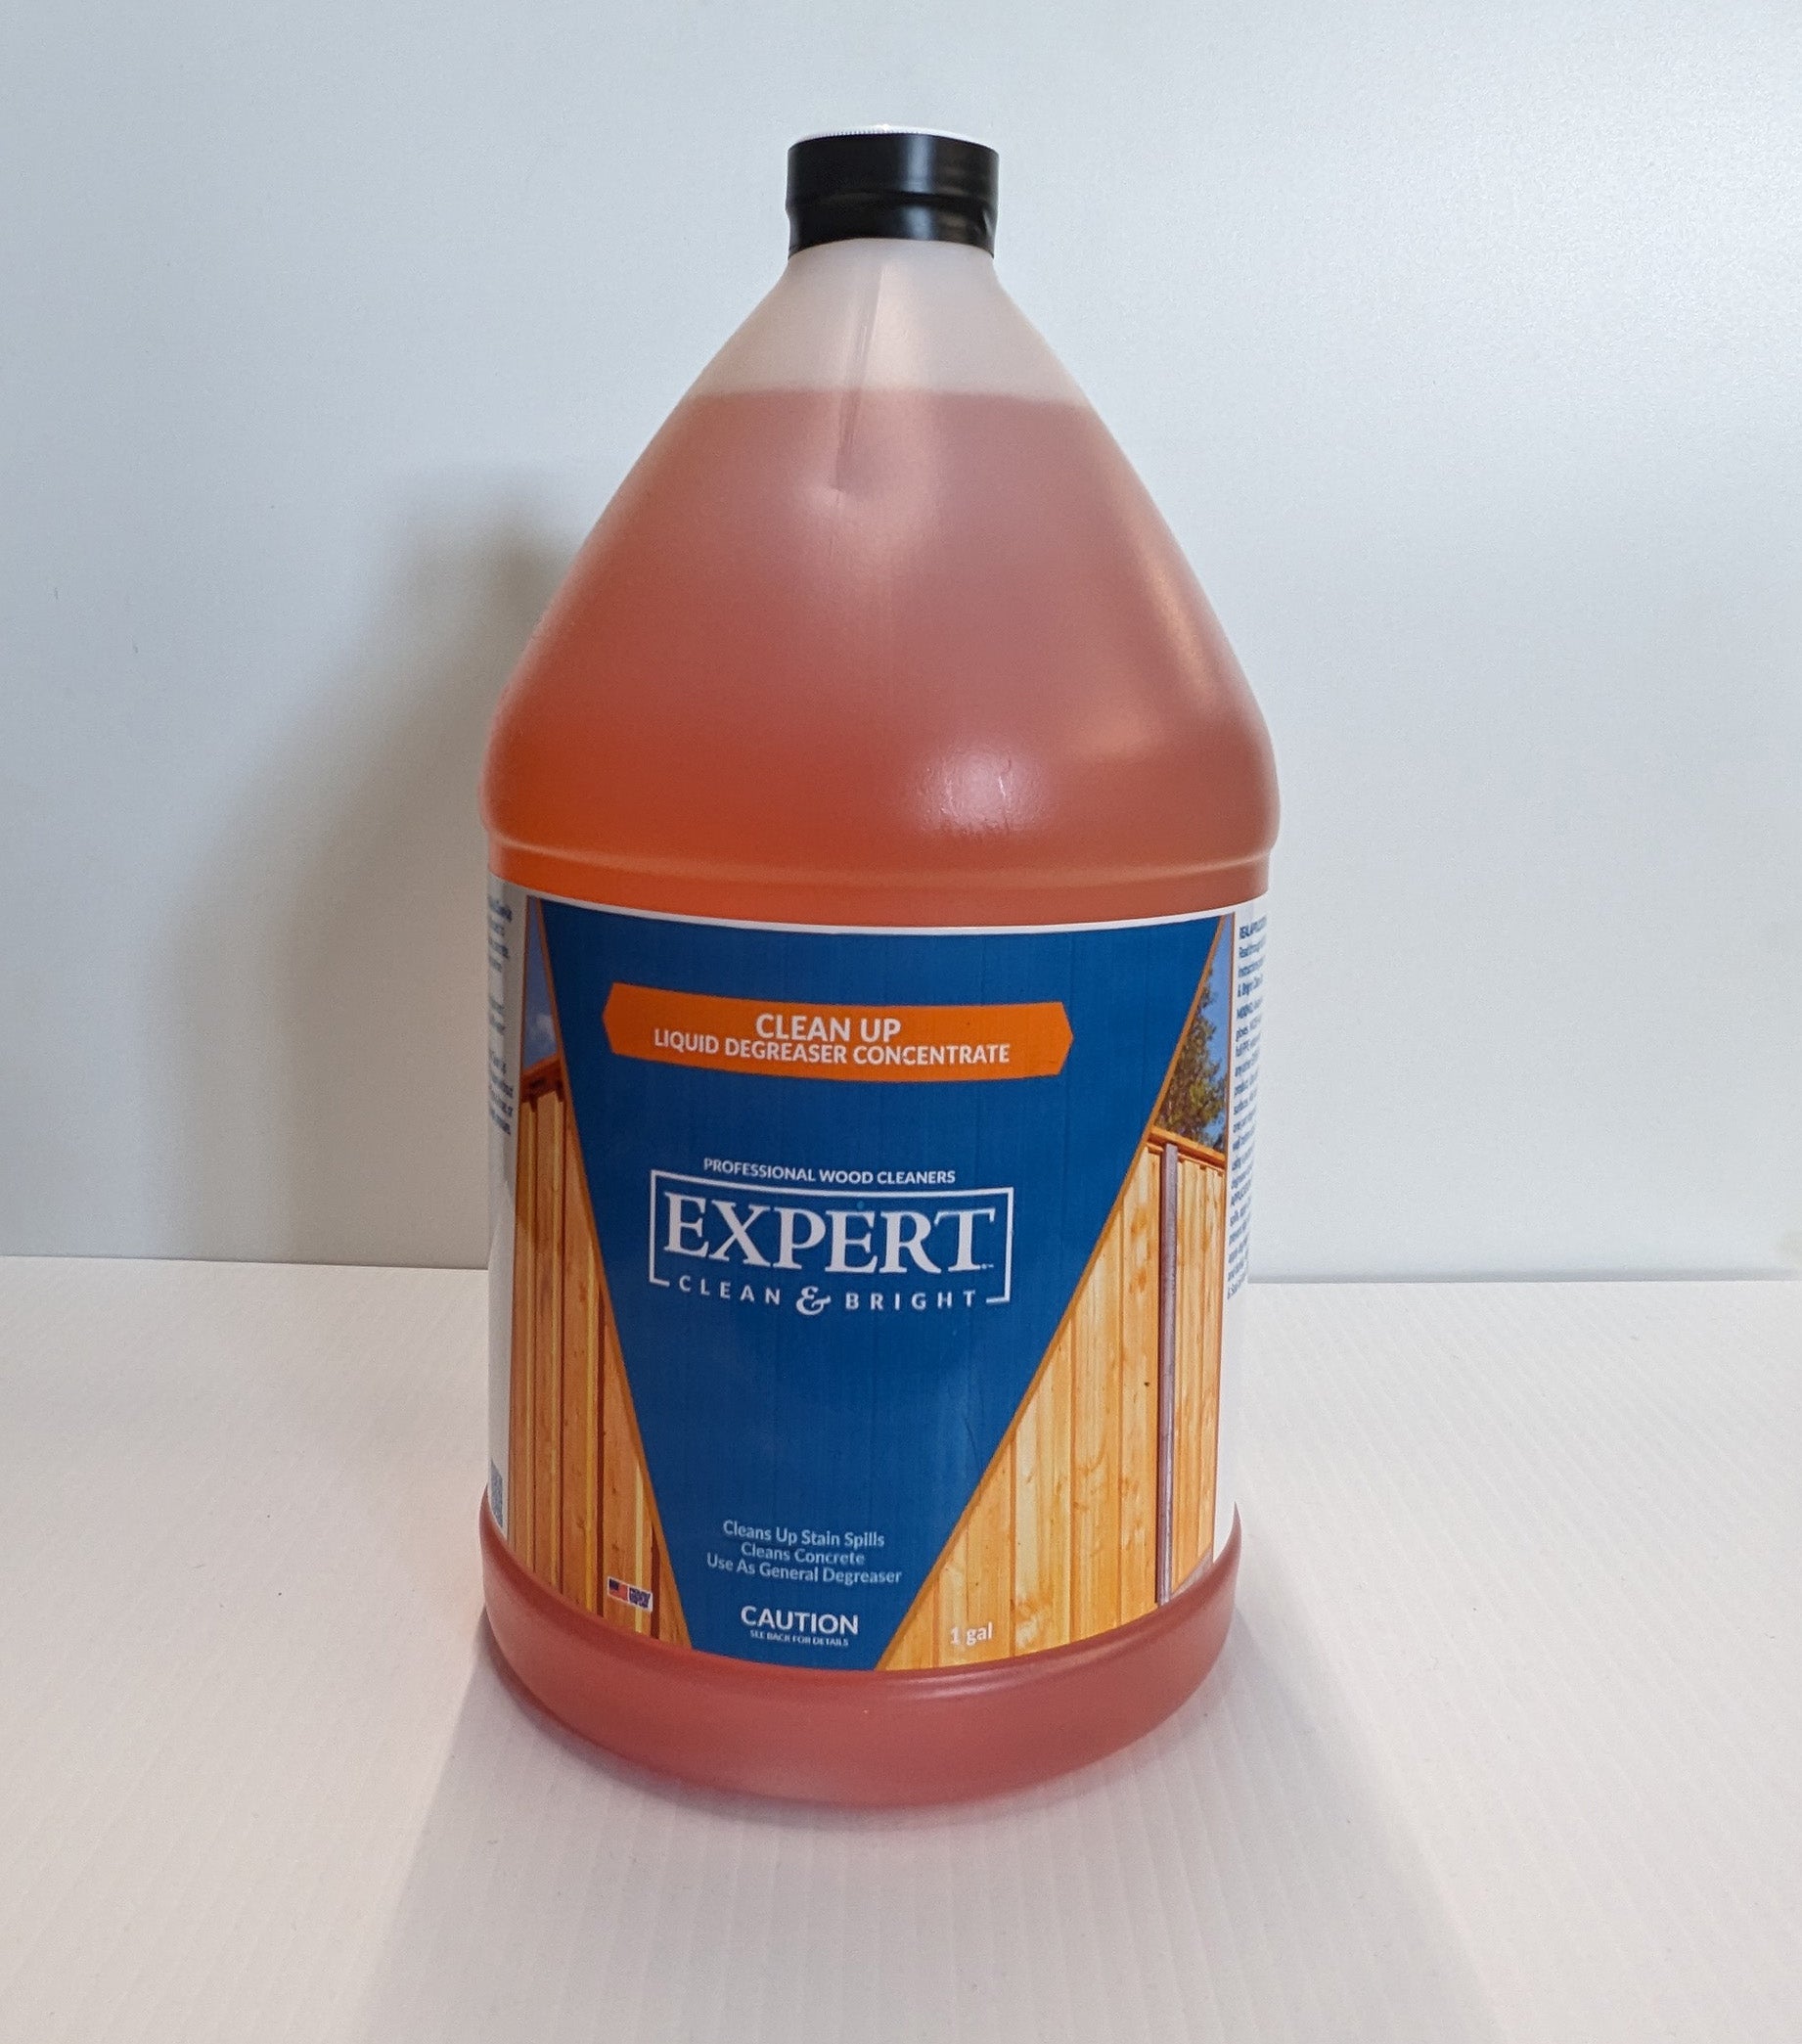 Expert Wood Care - Clean Up Degreaser